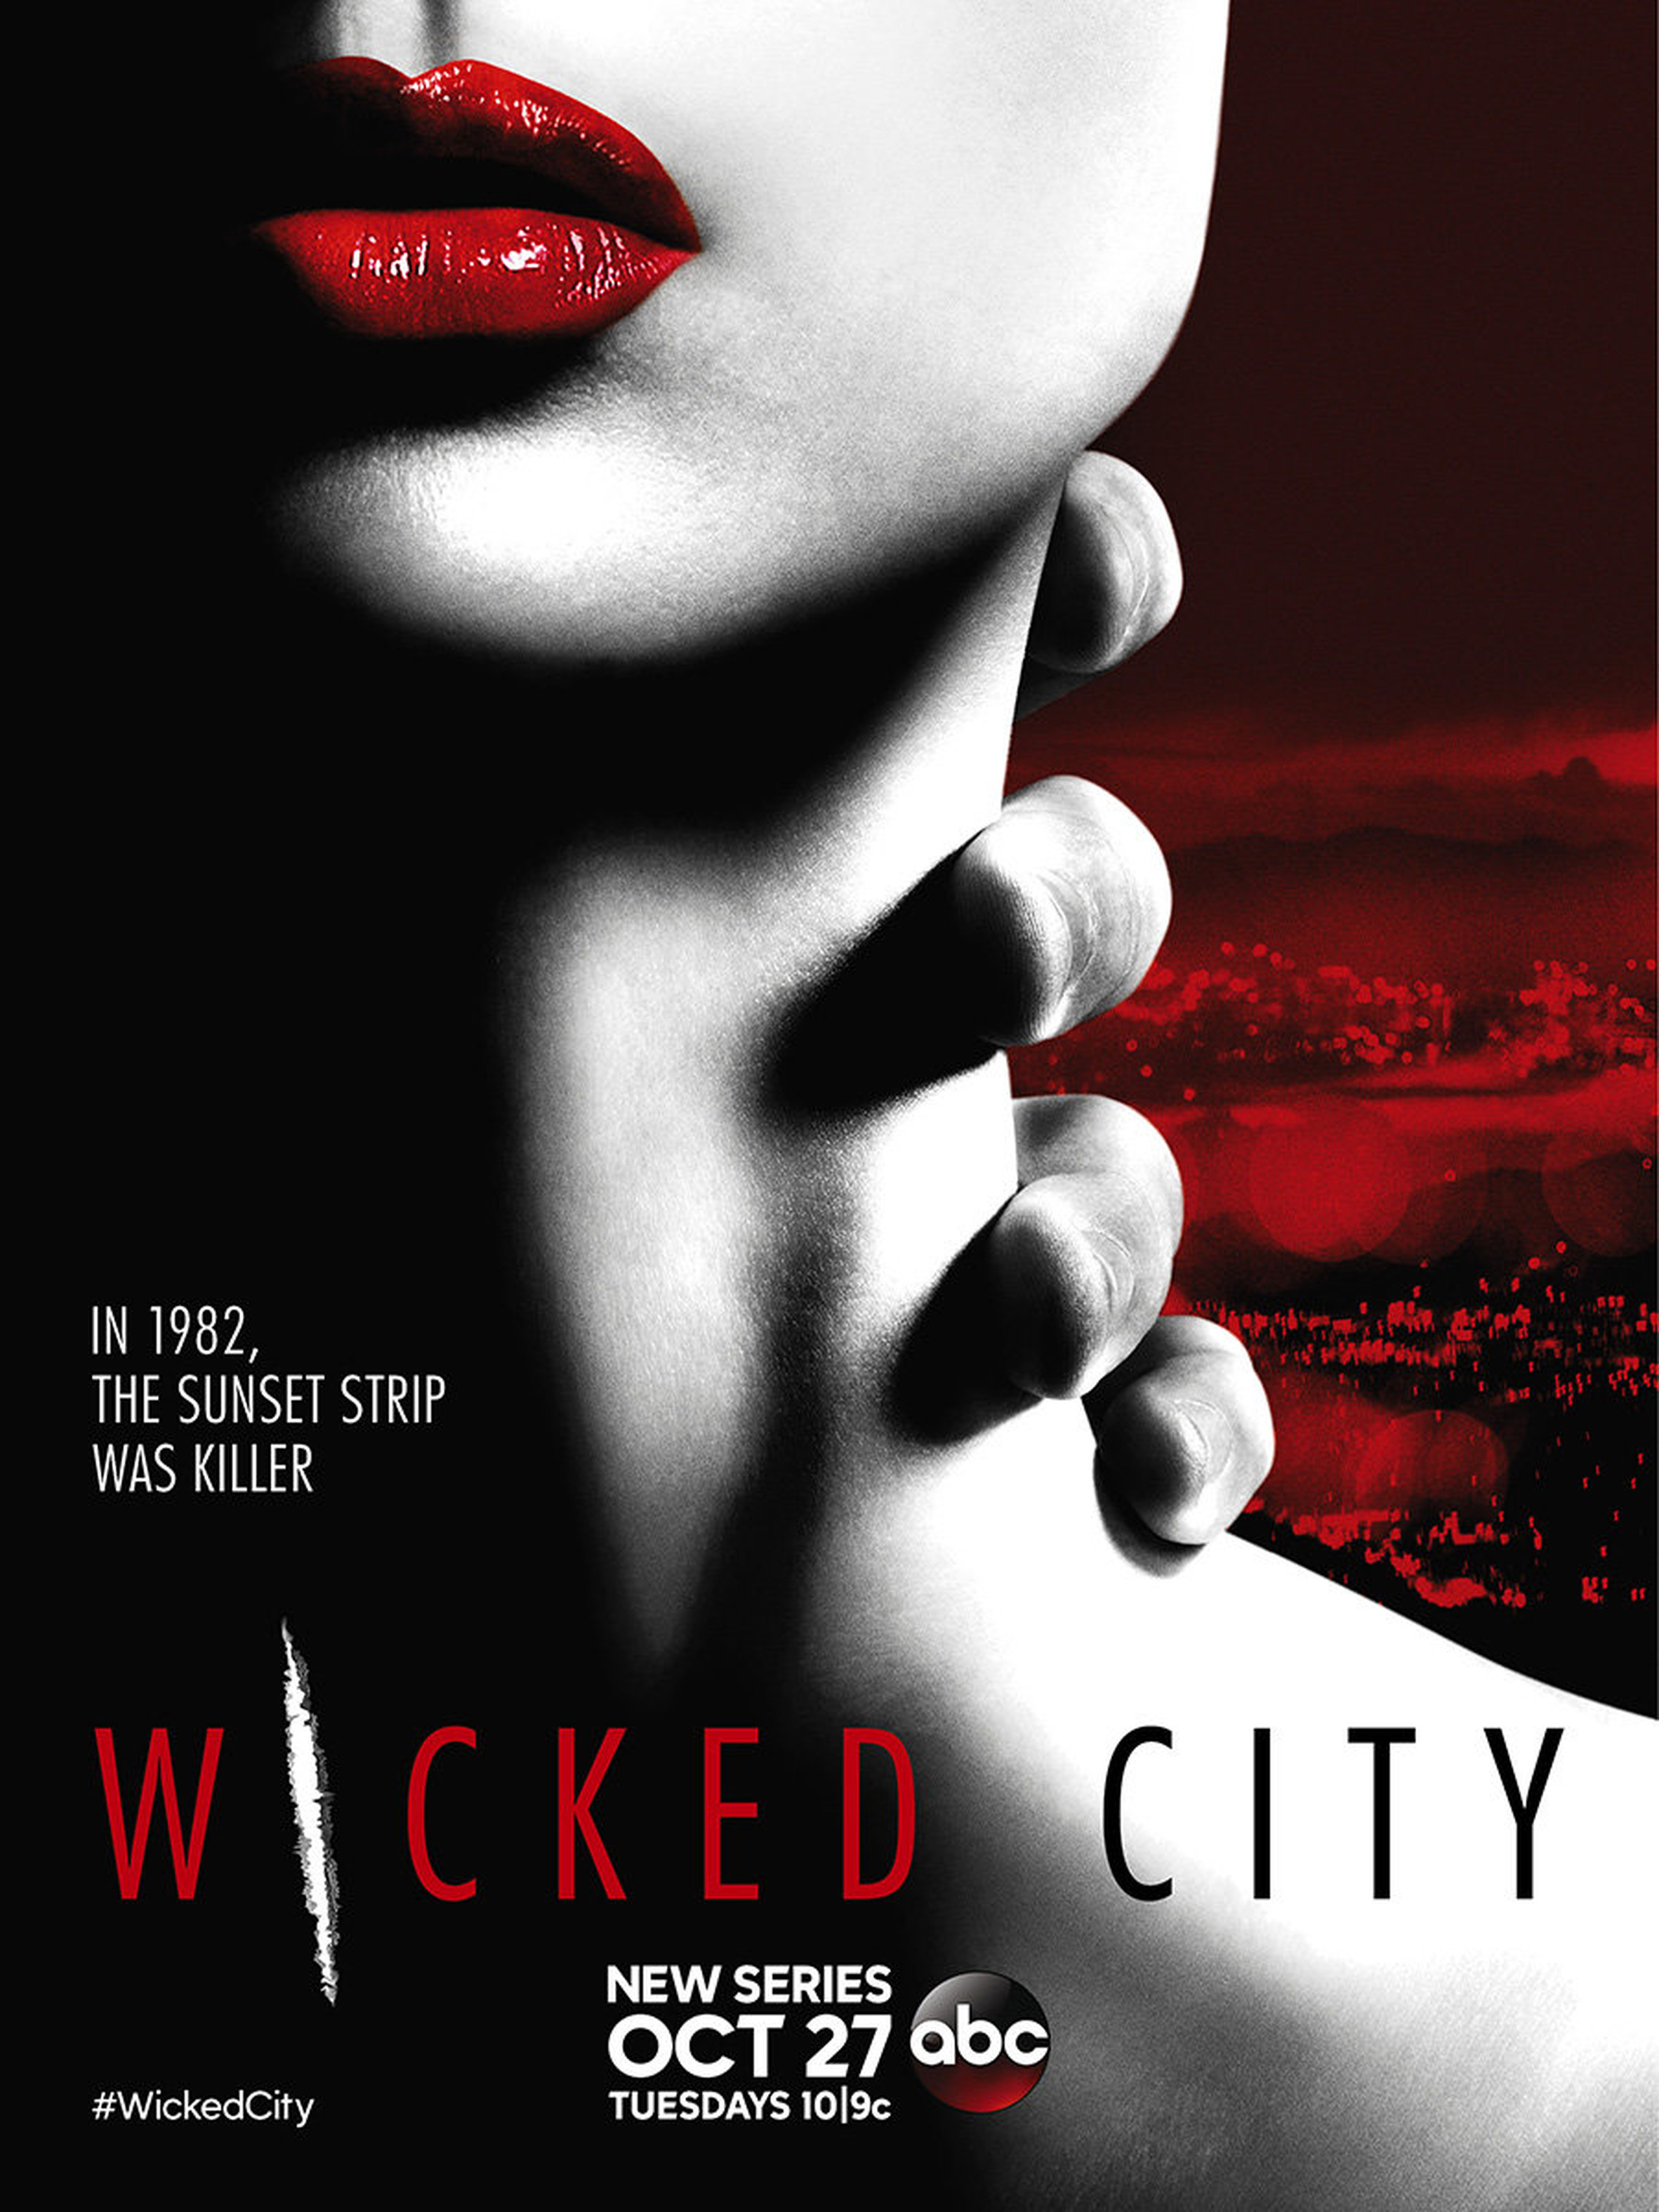 Two New Wicked City Posters Revealed Wicked City